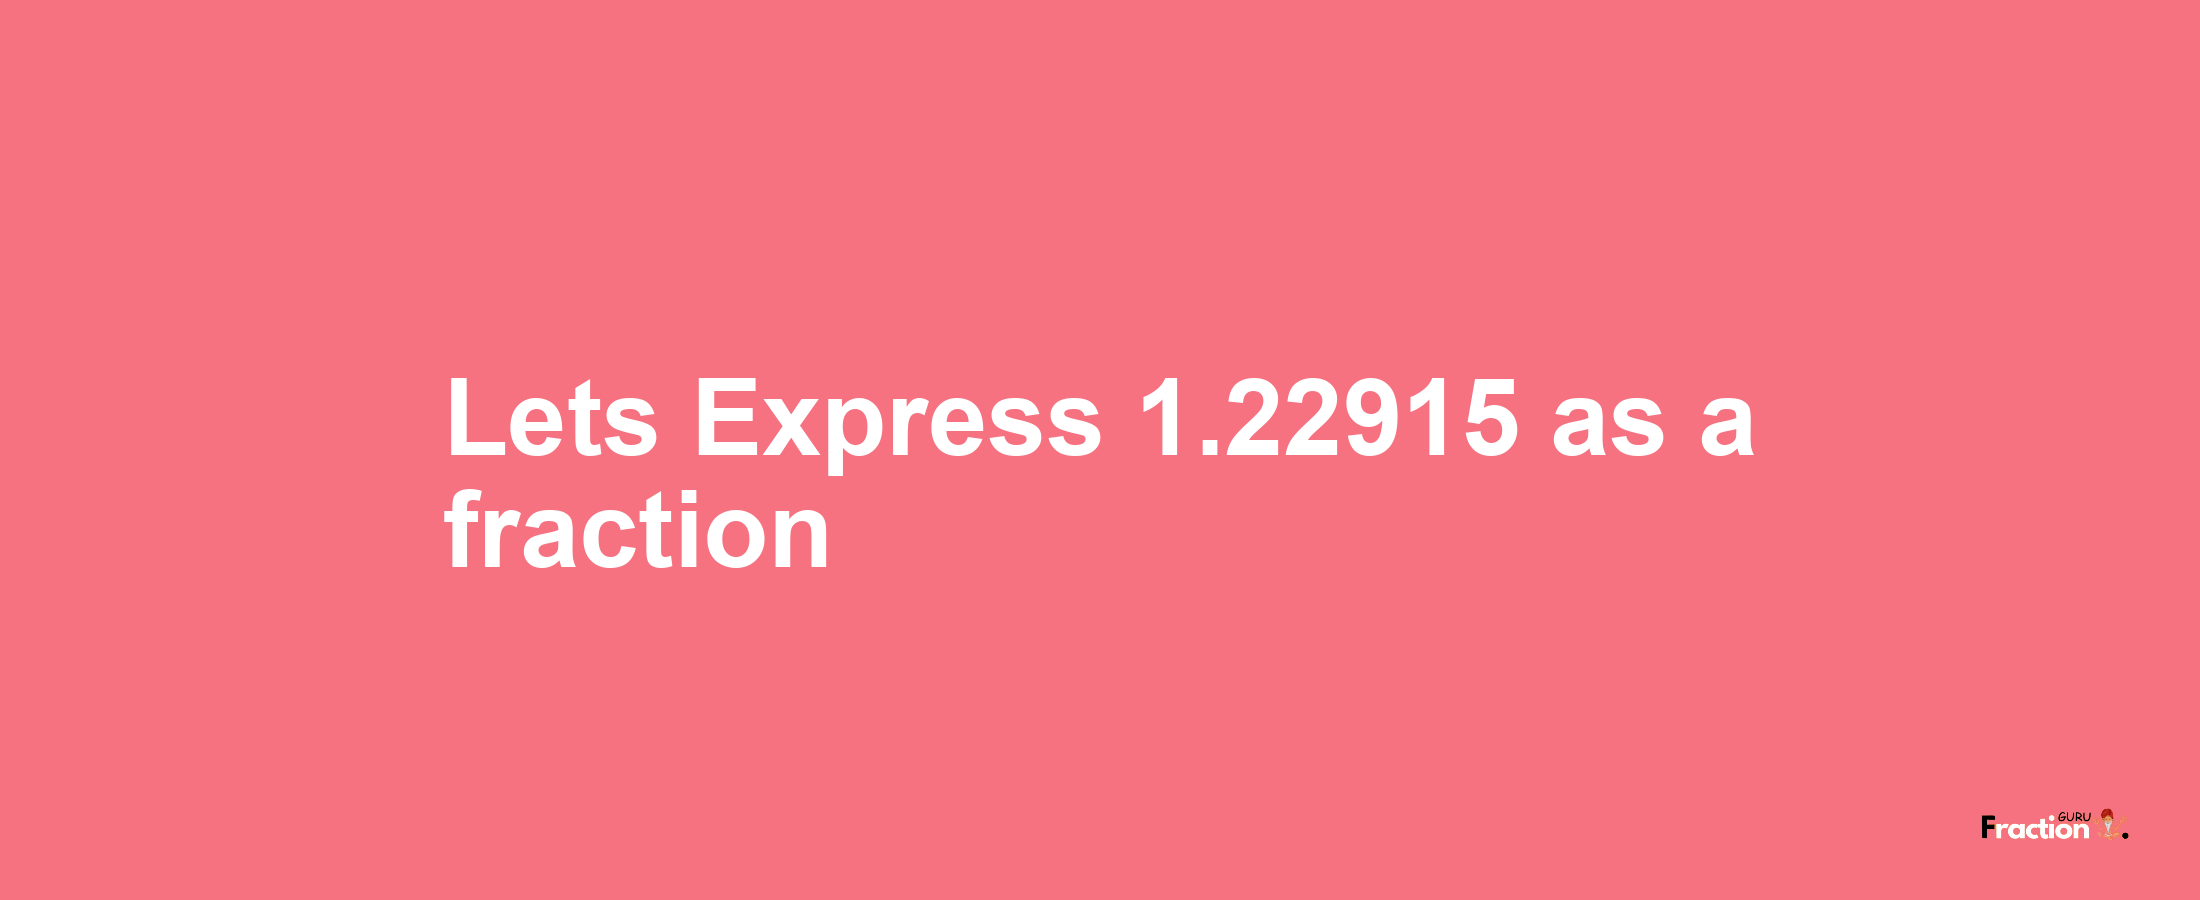 Lets Express 1.22915 as afraction